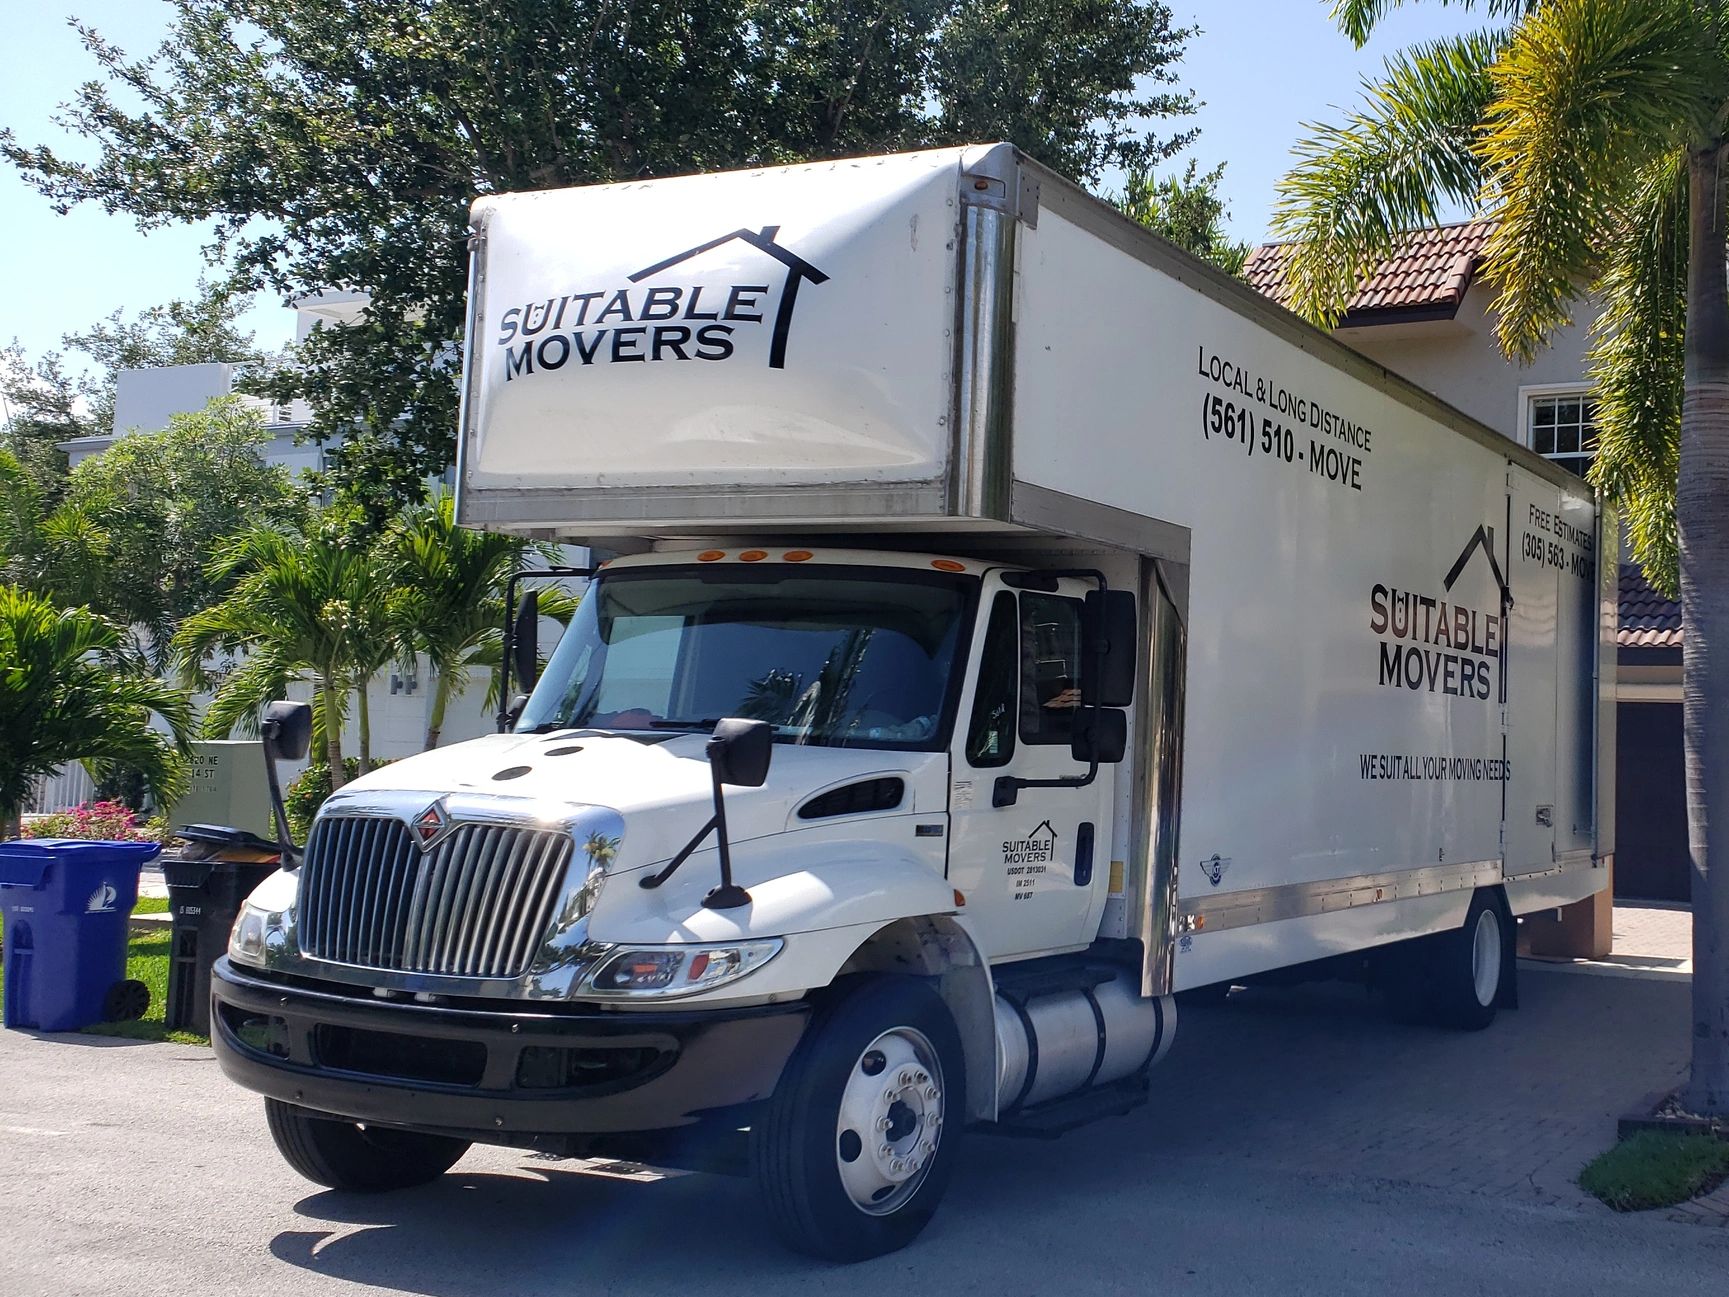 Suitable Movers, local movers, movers in sunrise, broward movers, moving company in florida